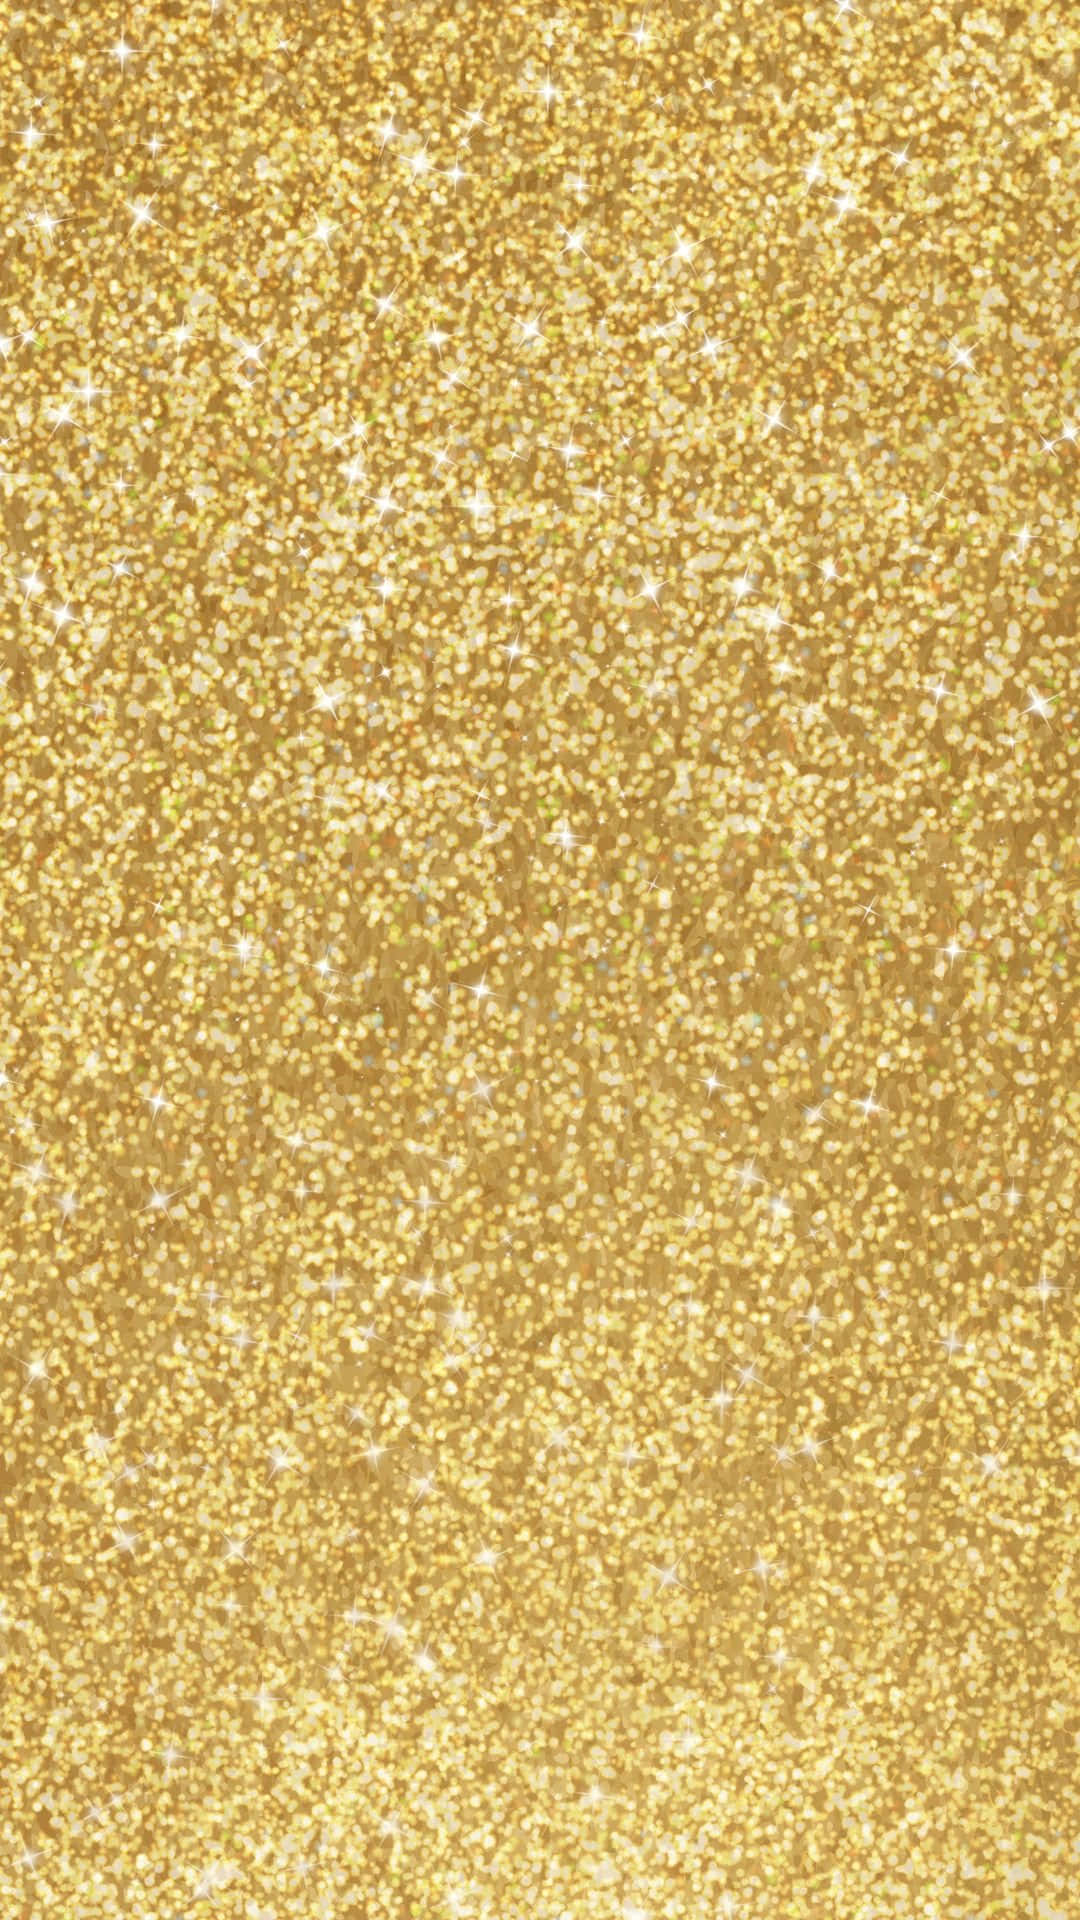 A Luxurious Shimmering Gold Glitter Effect Background.